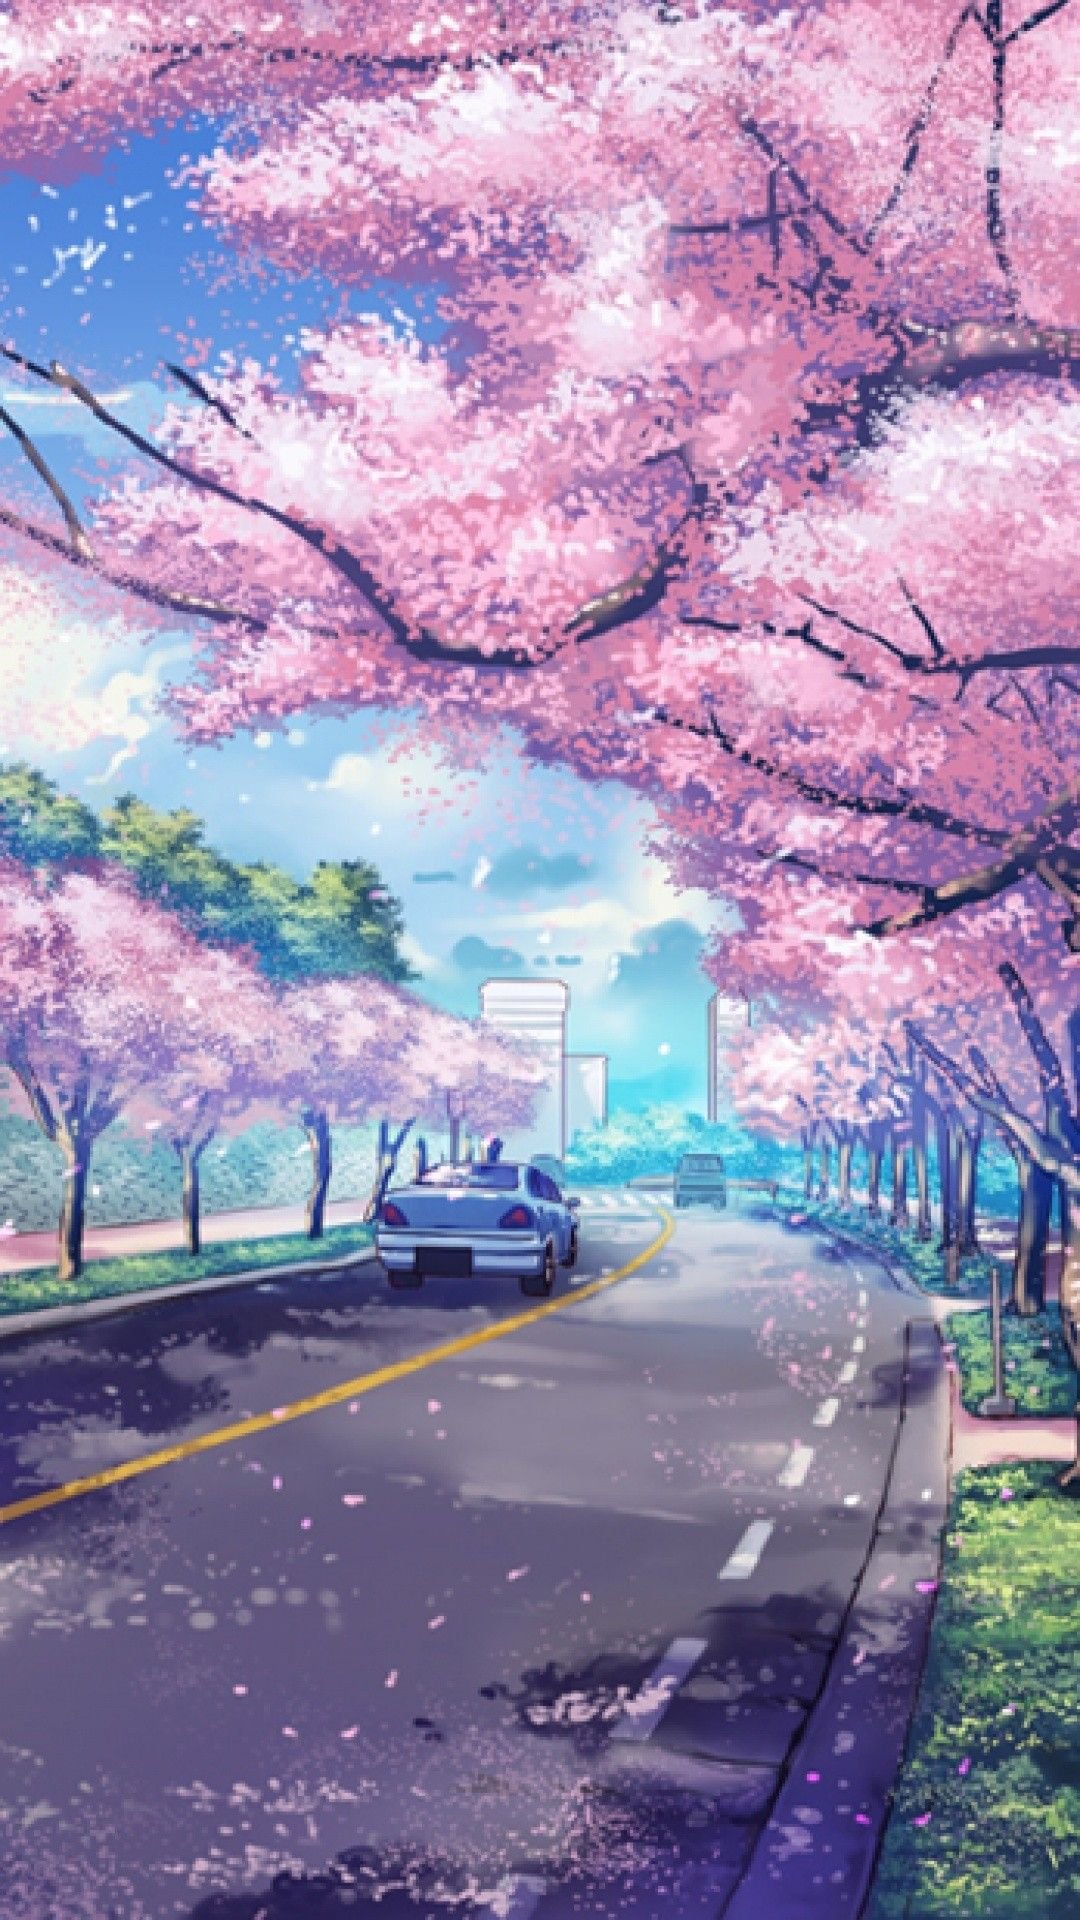 Anime Wallpapers - Top 85 Best Anime Backgrounds Download